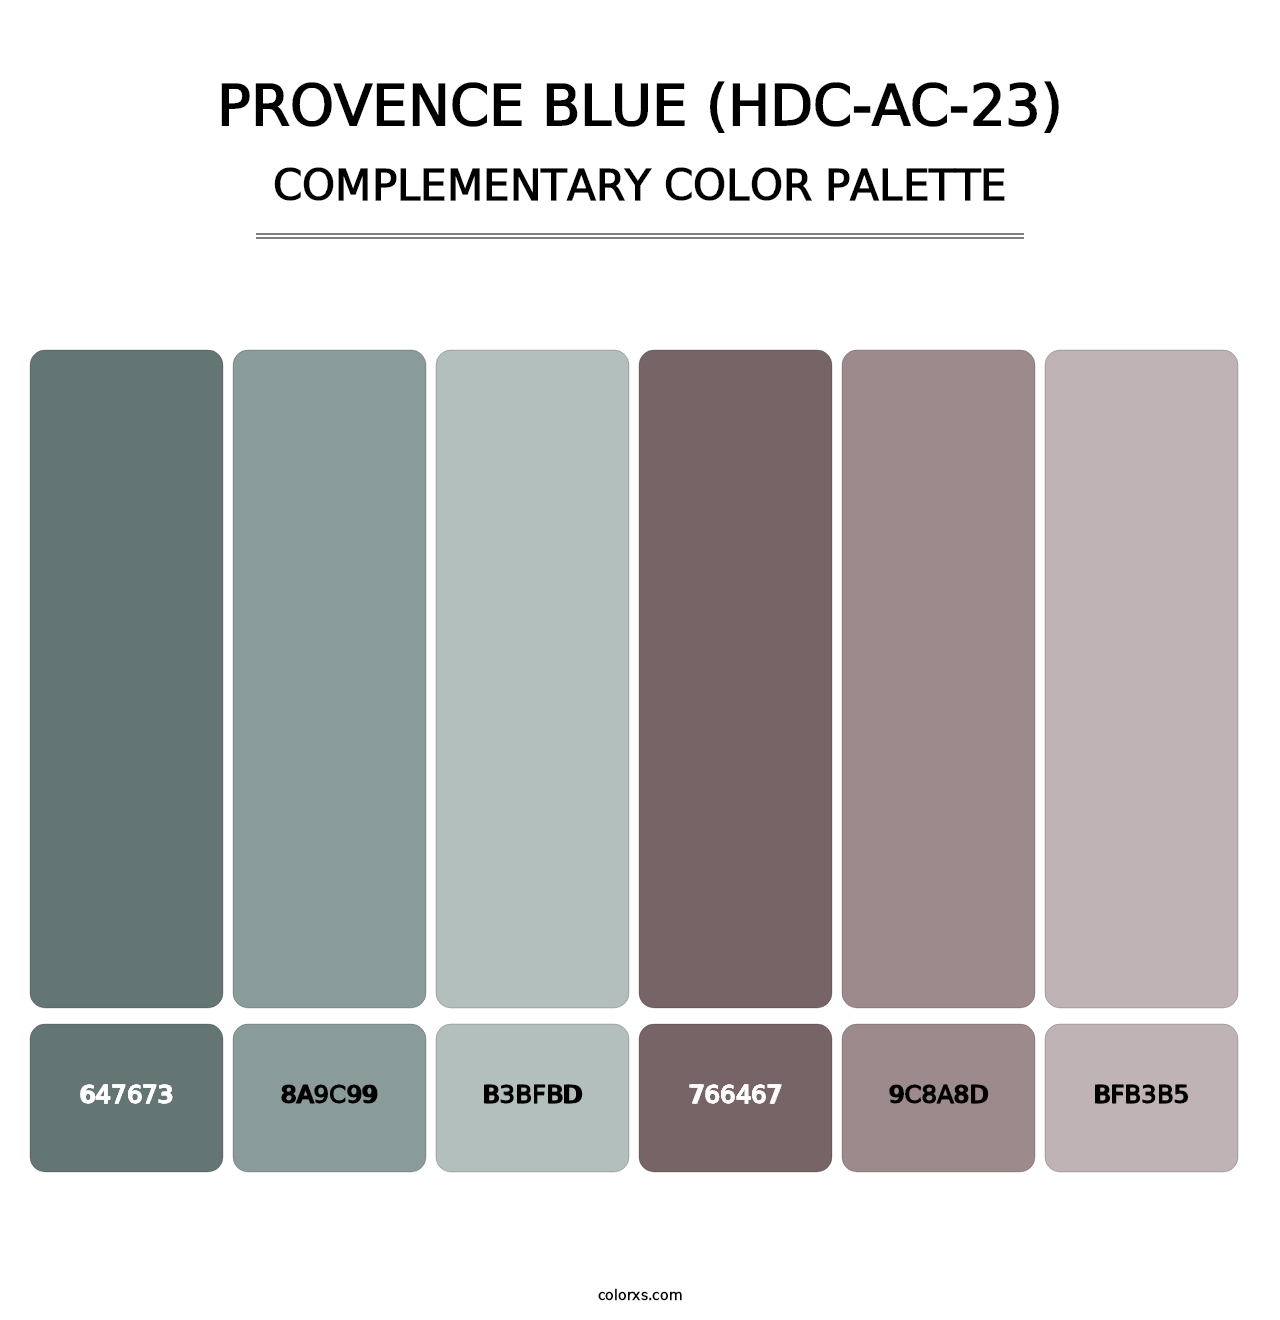 Provence Blue (HDC-AC-23) - Complementary Color Palette